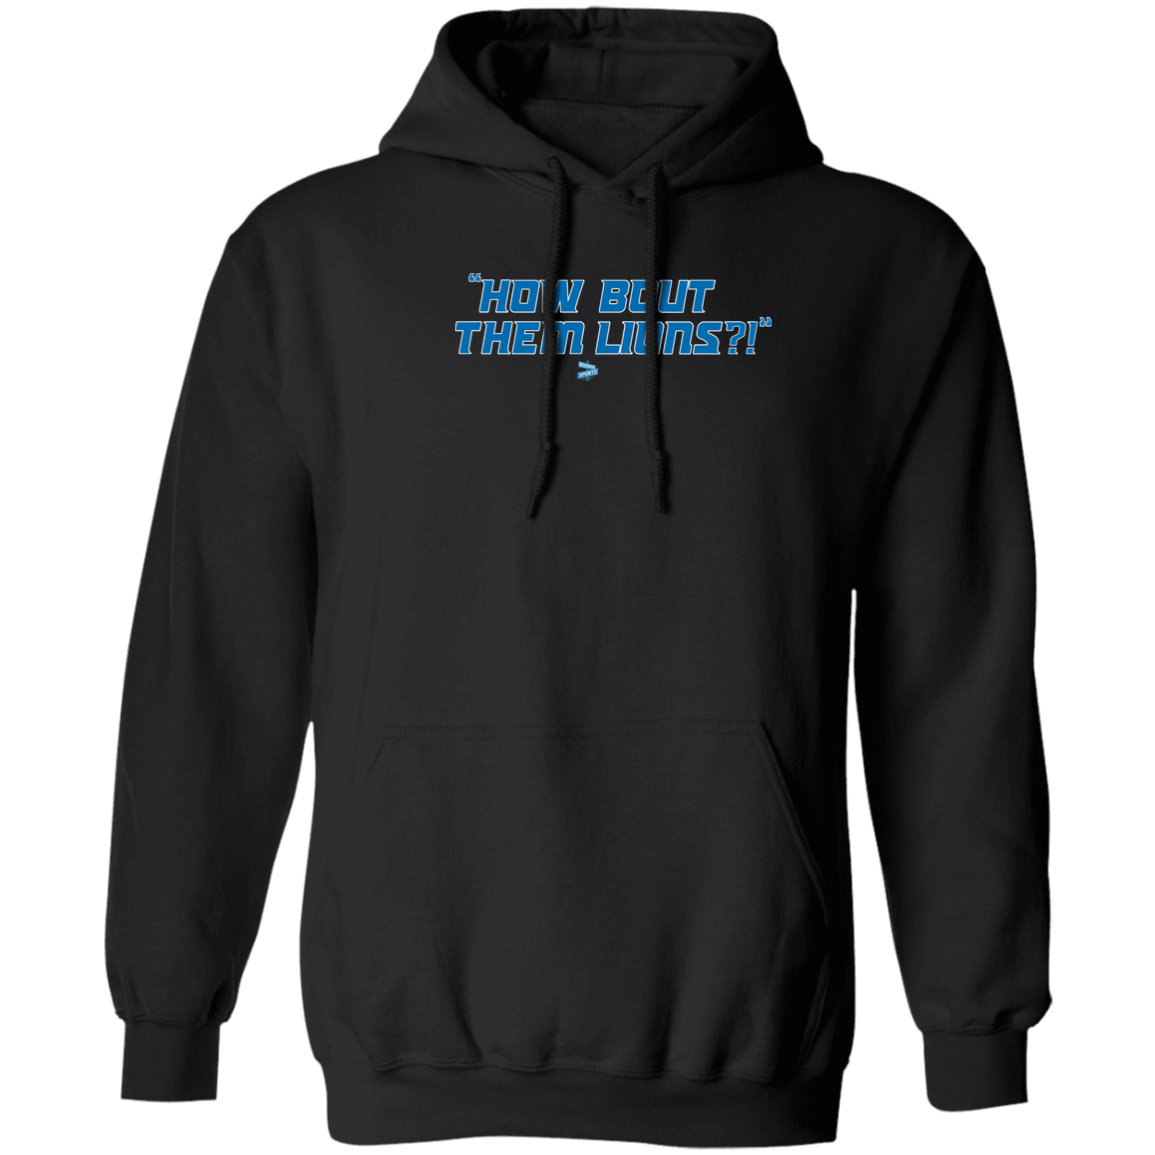 "How Bout Them Lions?" Hoodie